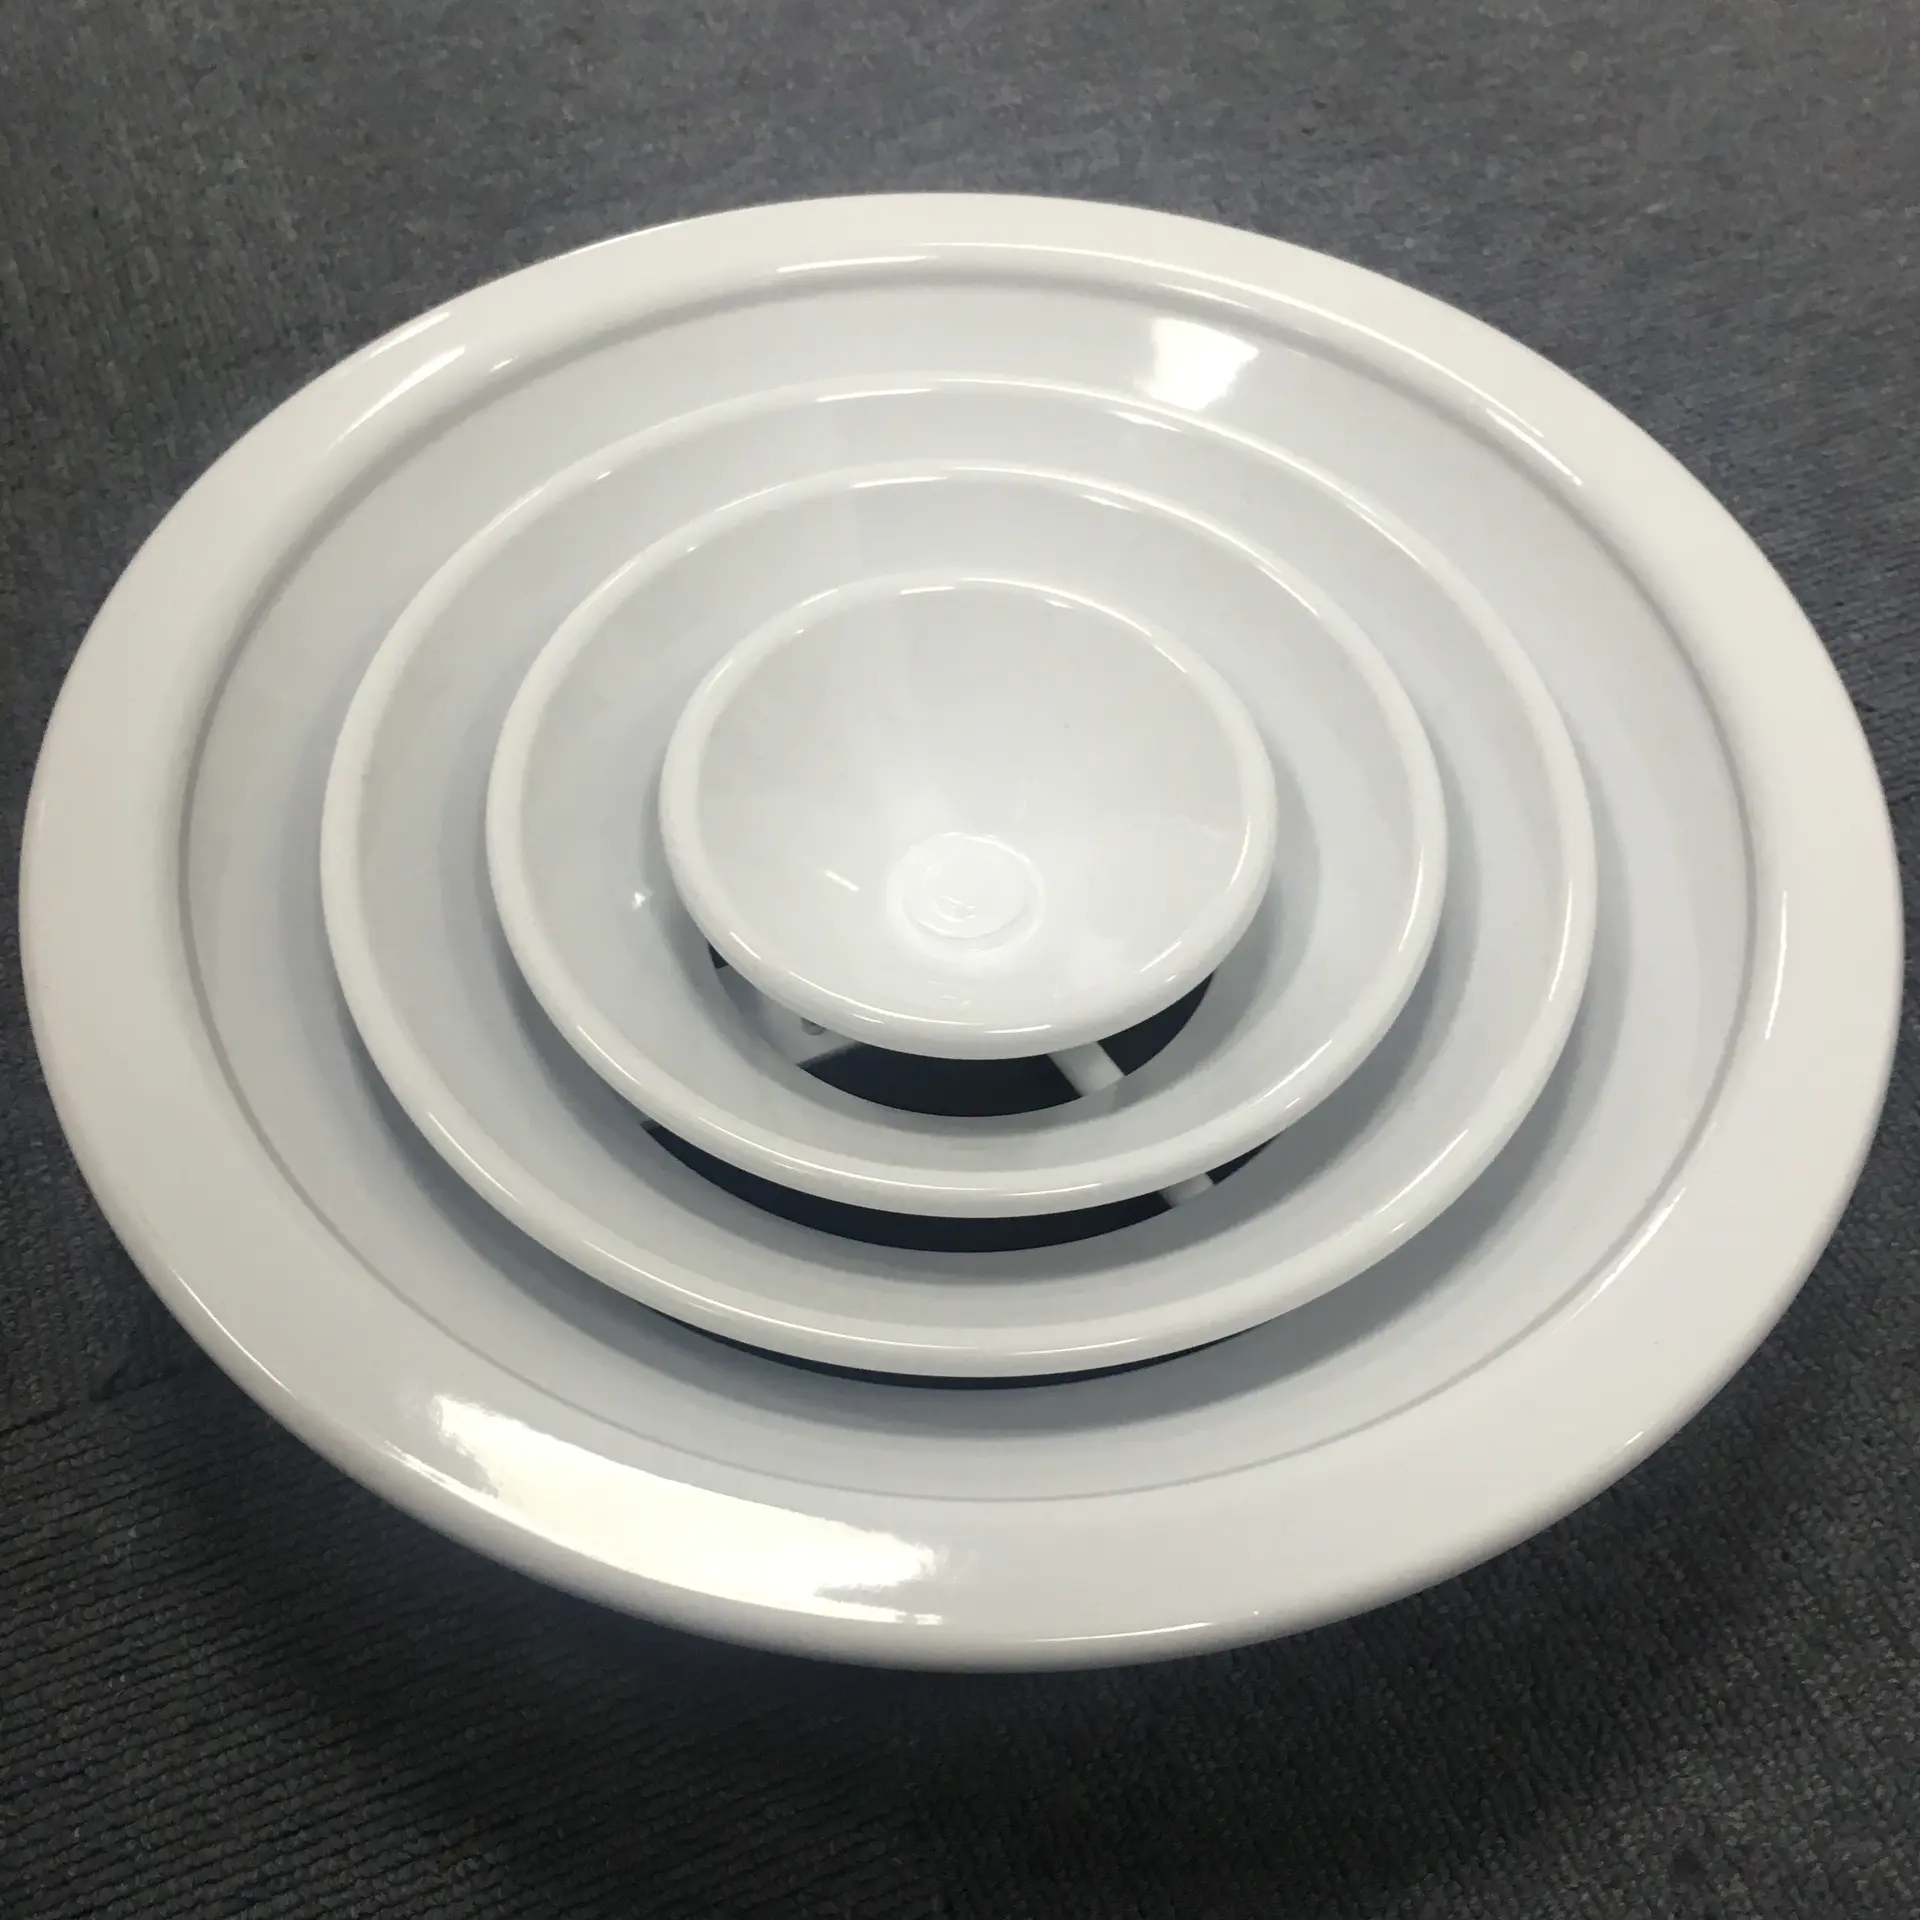 Hvac Duct Work Ventilation Supply Air Round Cone Circular Ceiling Diffusers